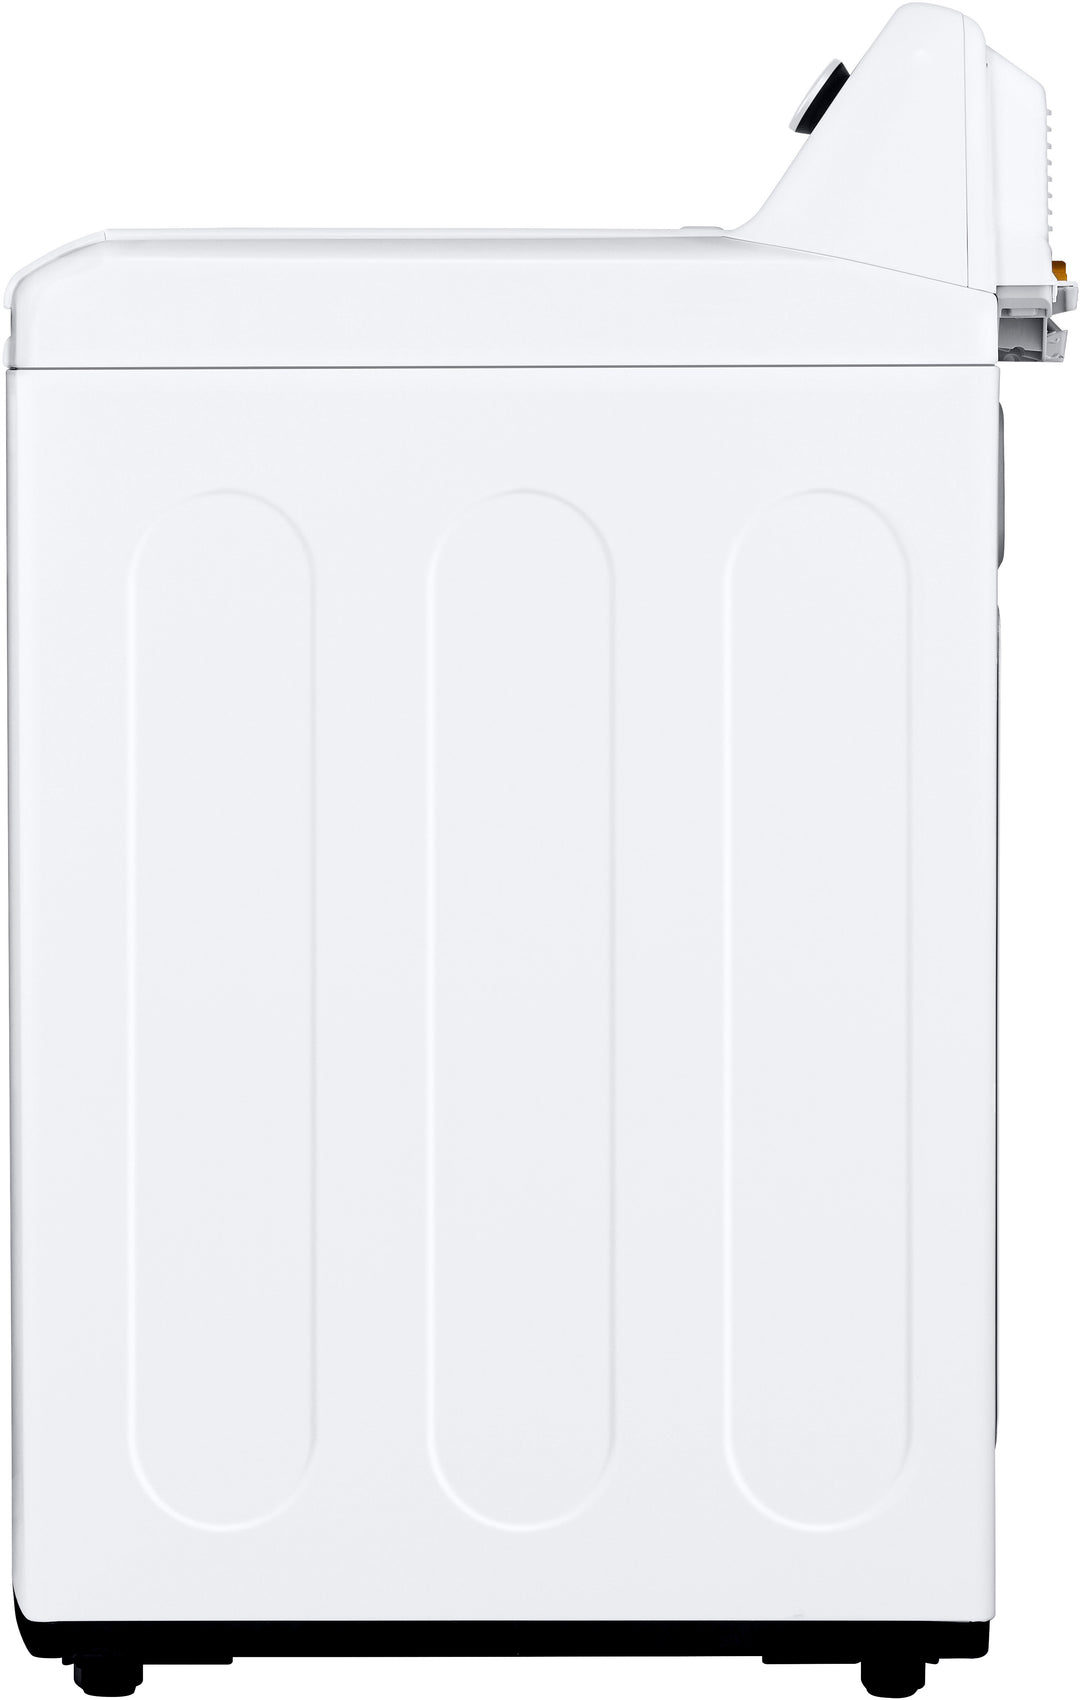 LG - 4.1 Cu. Ft. Smart Top Load Washer with SlamProof Glass Lid - White_18